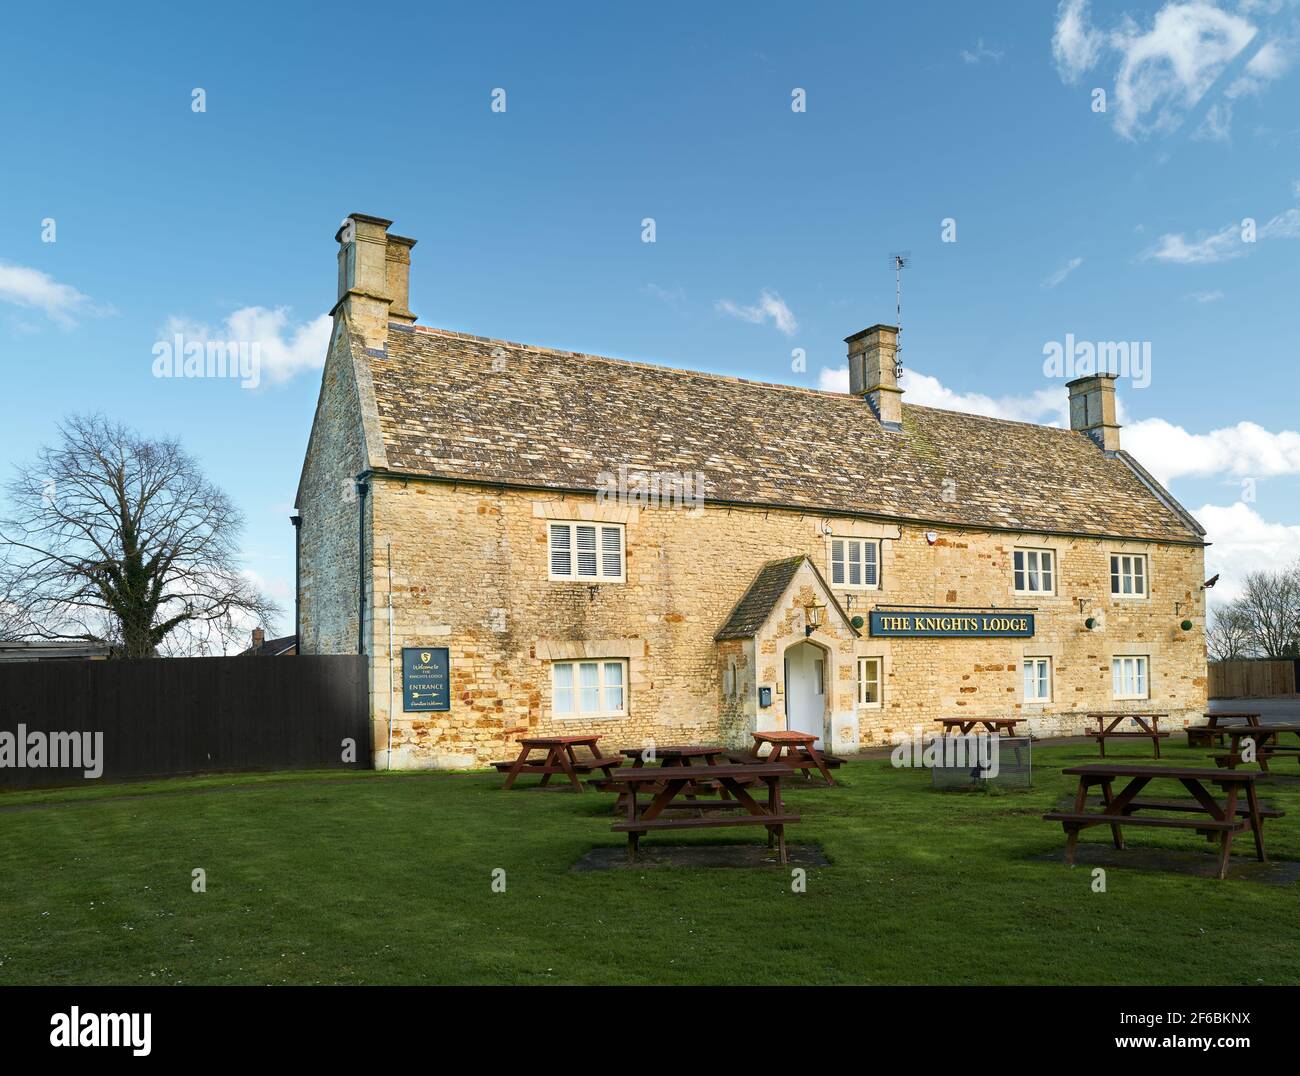 The Knights Lodge public house, run by Everards brewery, at Corby, England, closed during a national lockdown to prevent the spread of covid-19. Stock Photo